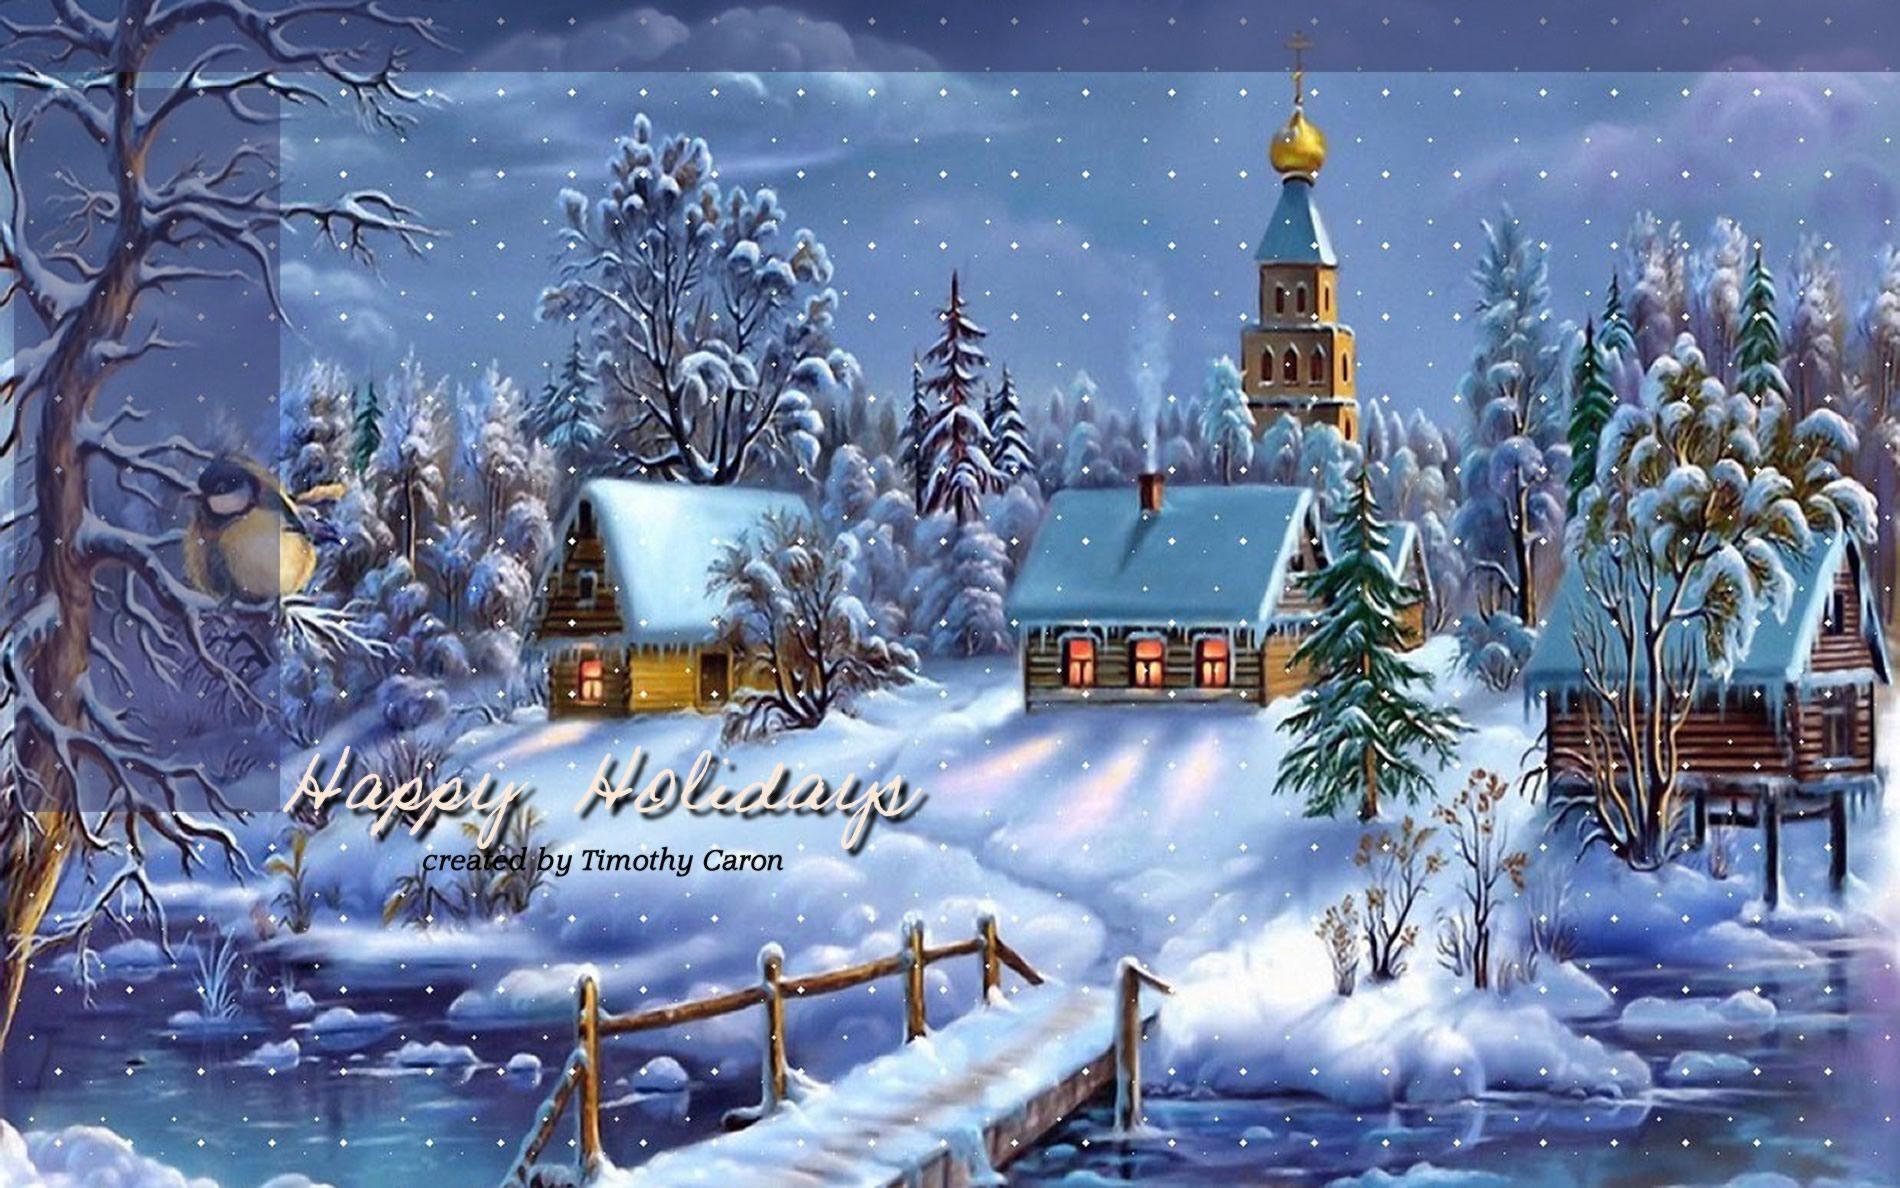 Handsome Holiday Desktop Wallpaper Free 1900x1188PX Free Holiday